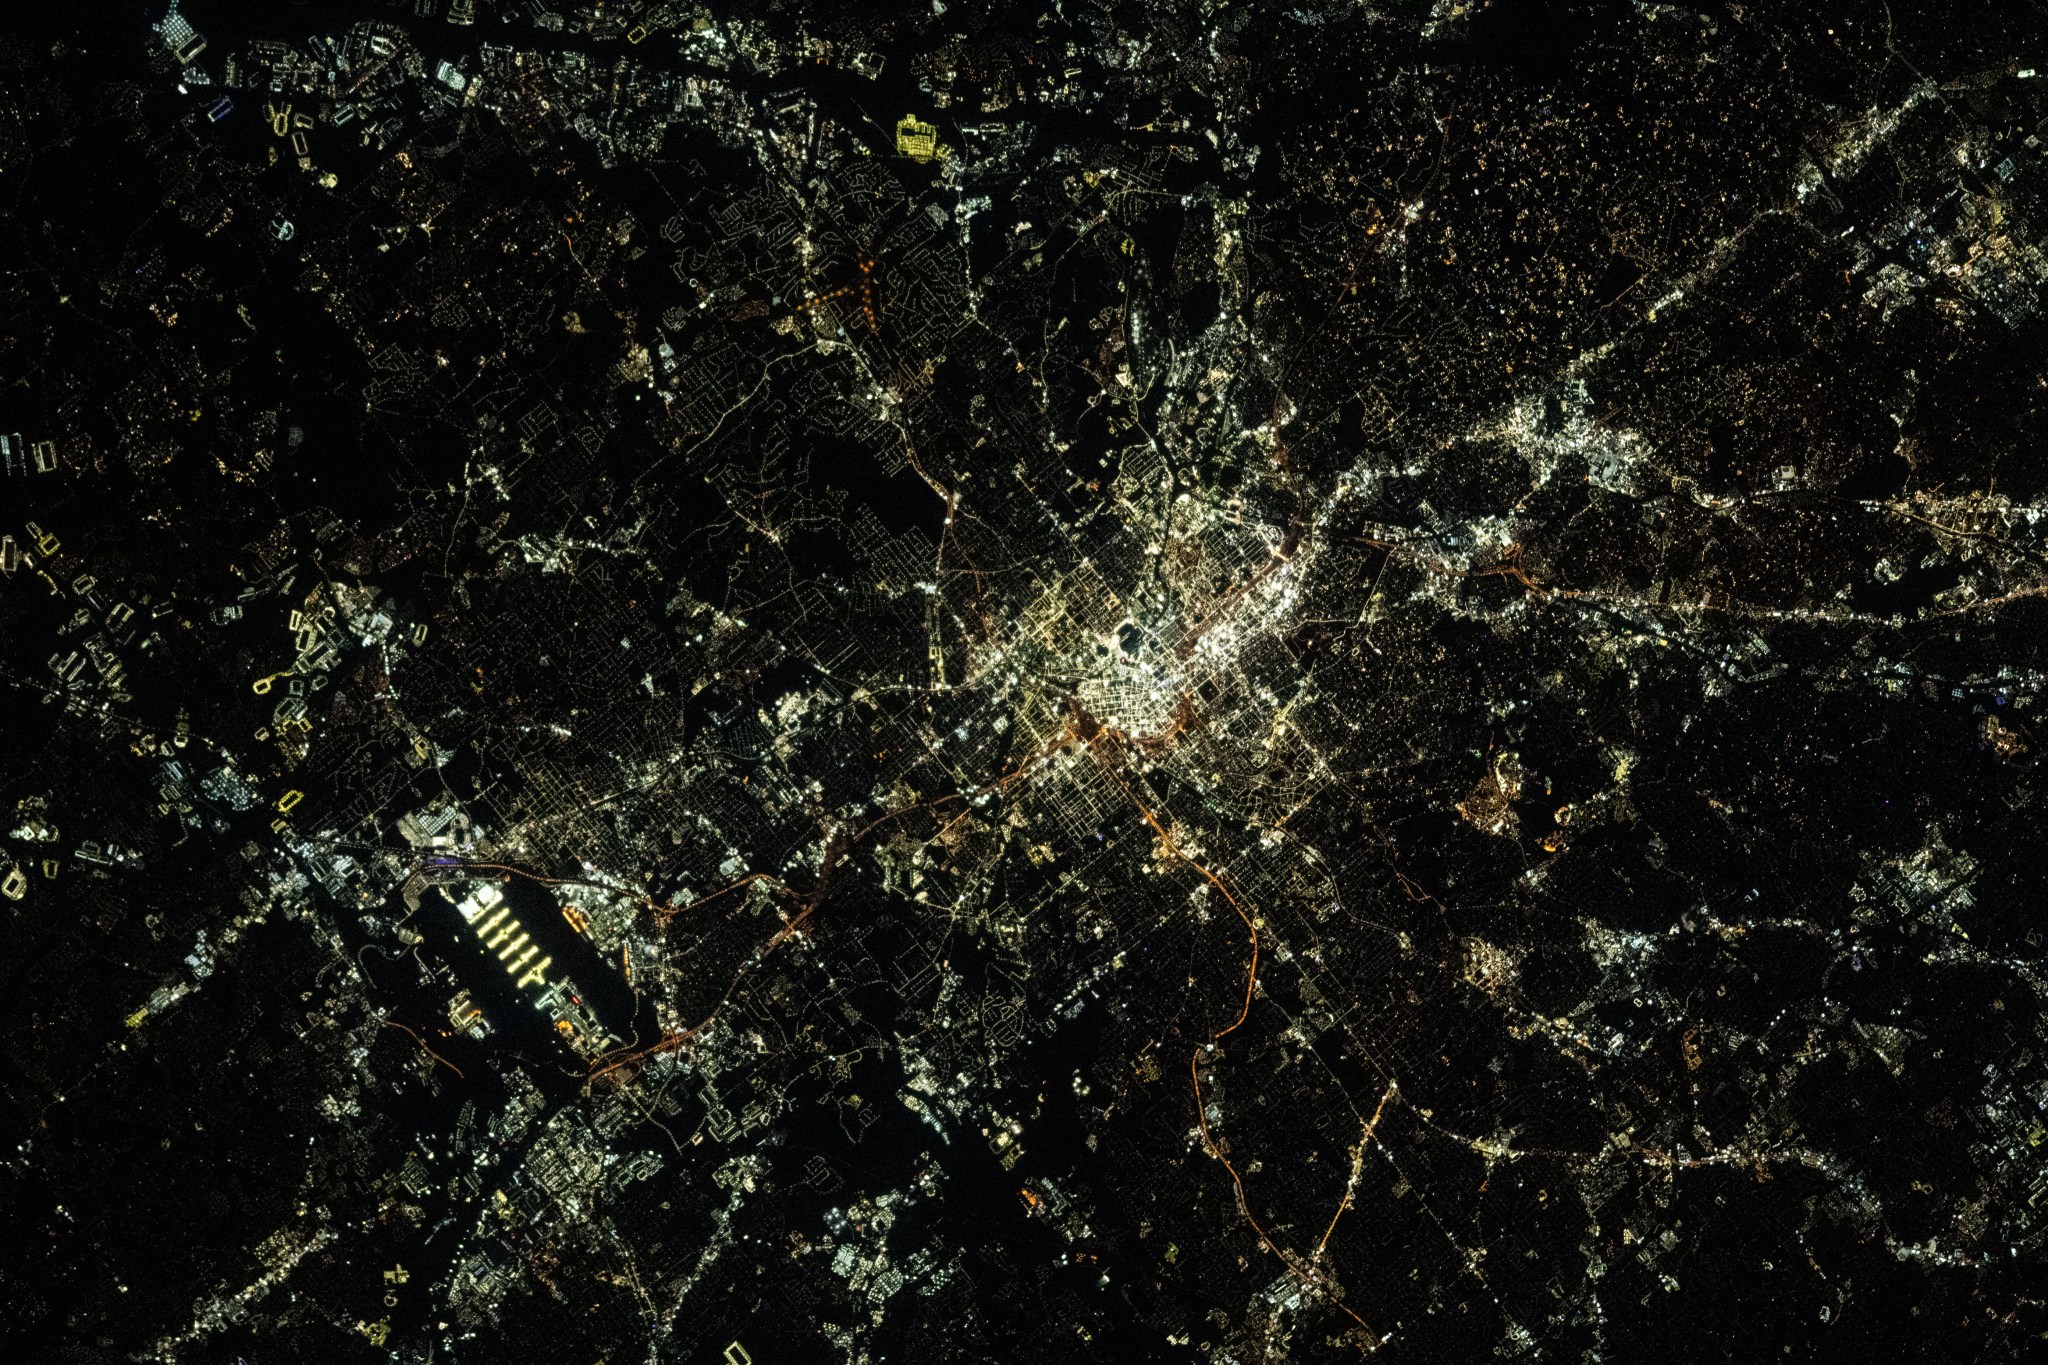 Atlanta, Georgia, and Hartsfield-Jackson Atlanta International Airport (lower left) are pictured during nighttime from the International Space Station as it orbited 260 miles above the Peach State.